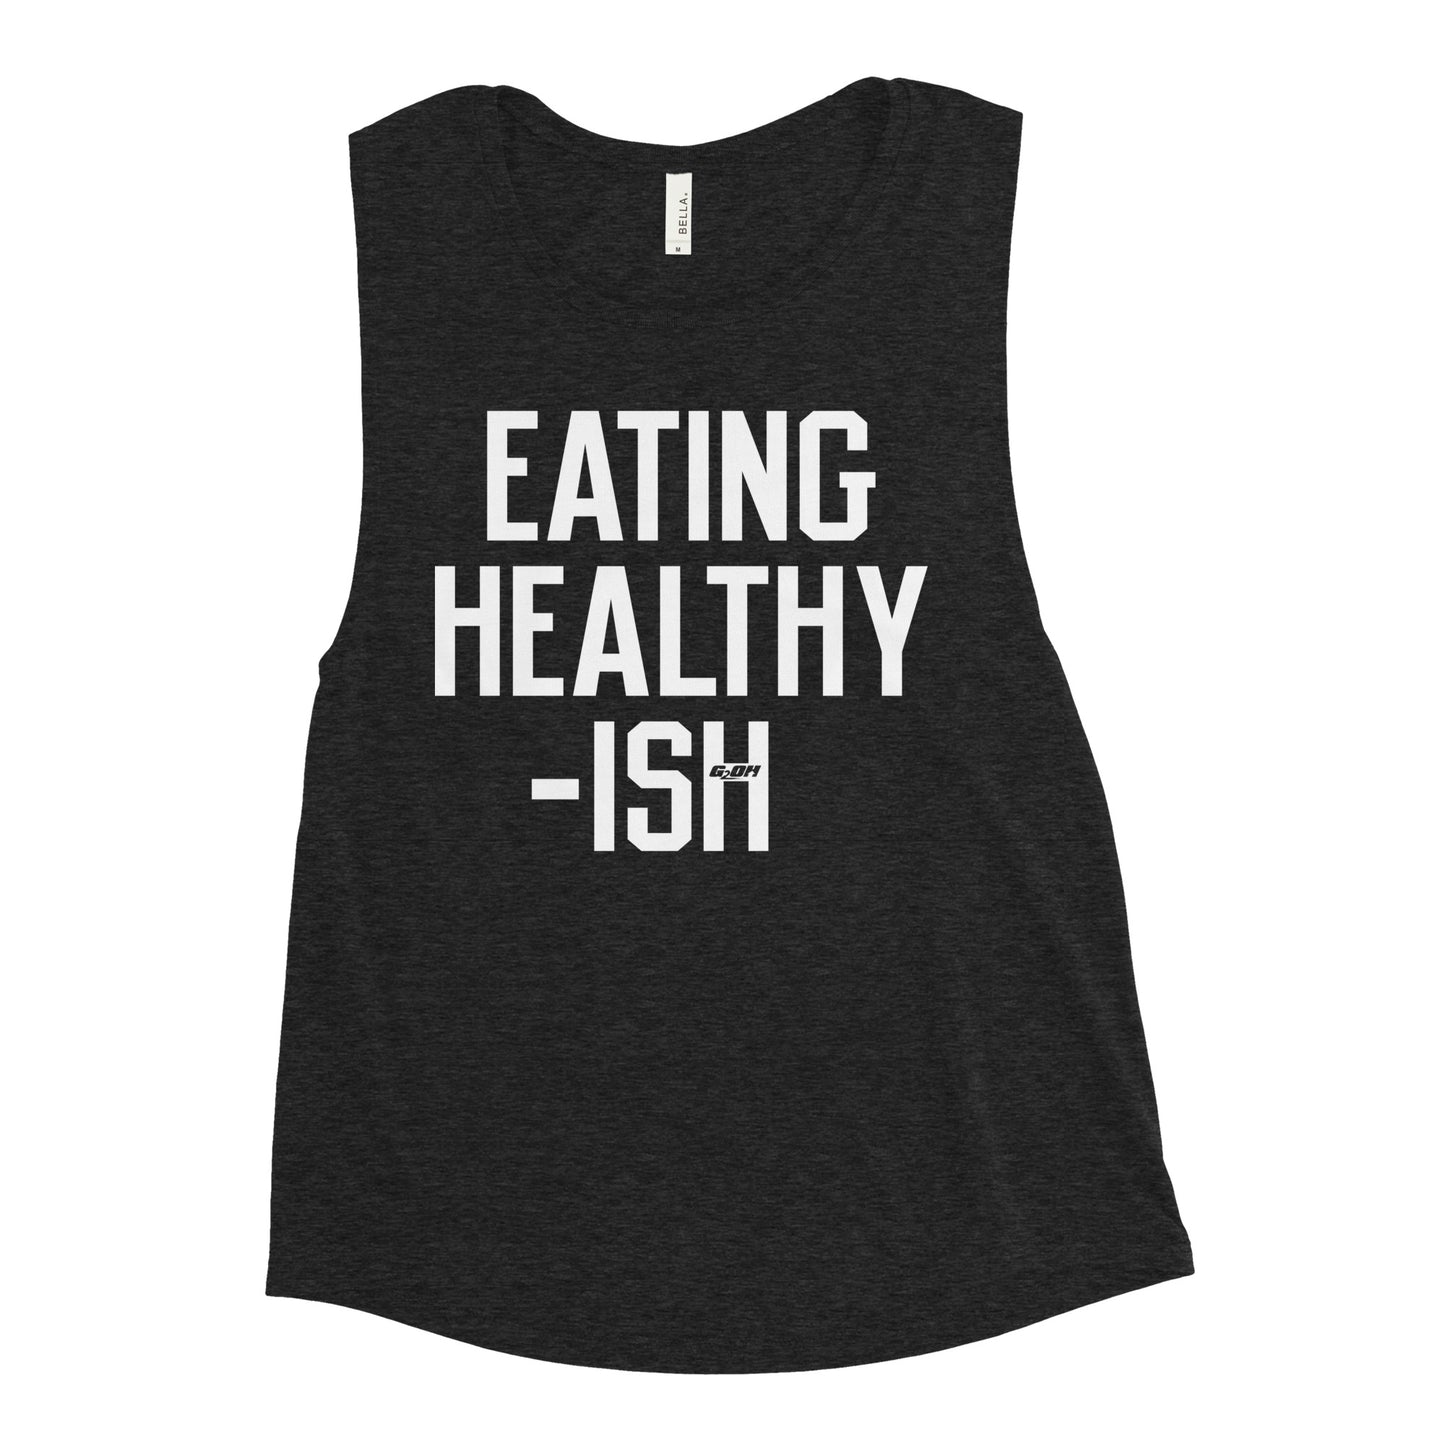 Eating Healthy-ish Women's Muscle Tank